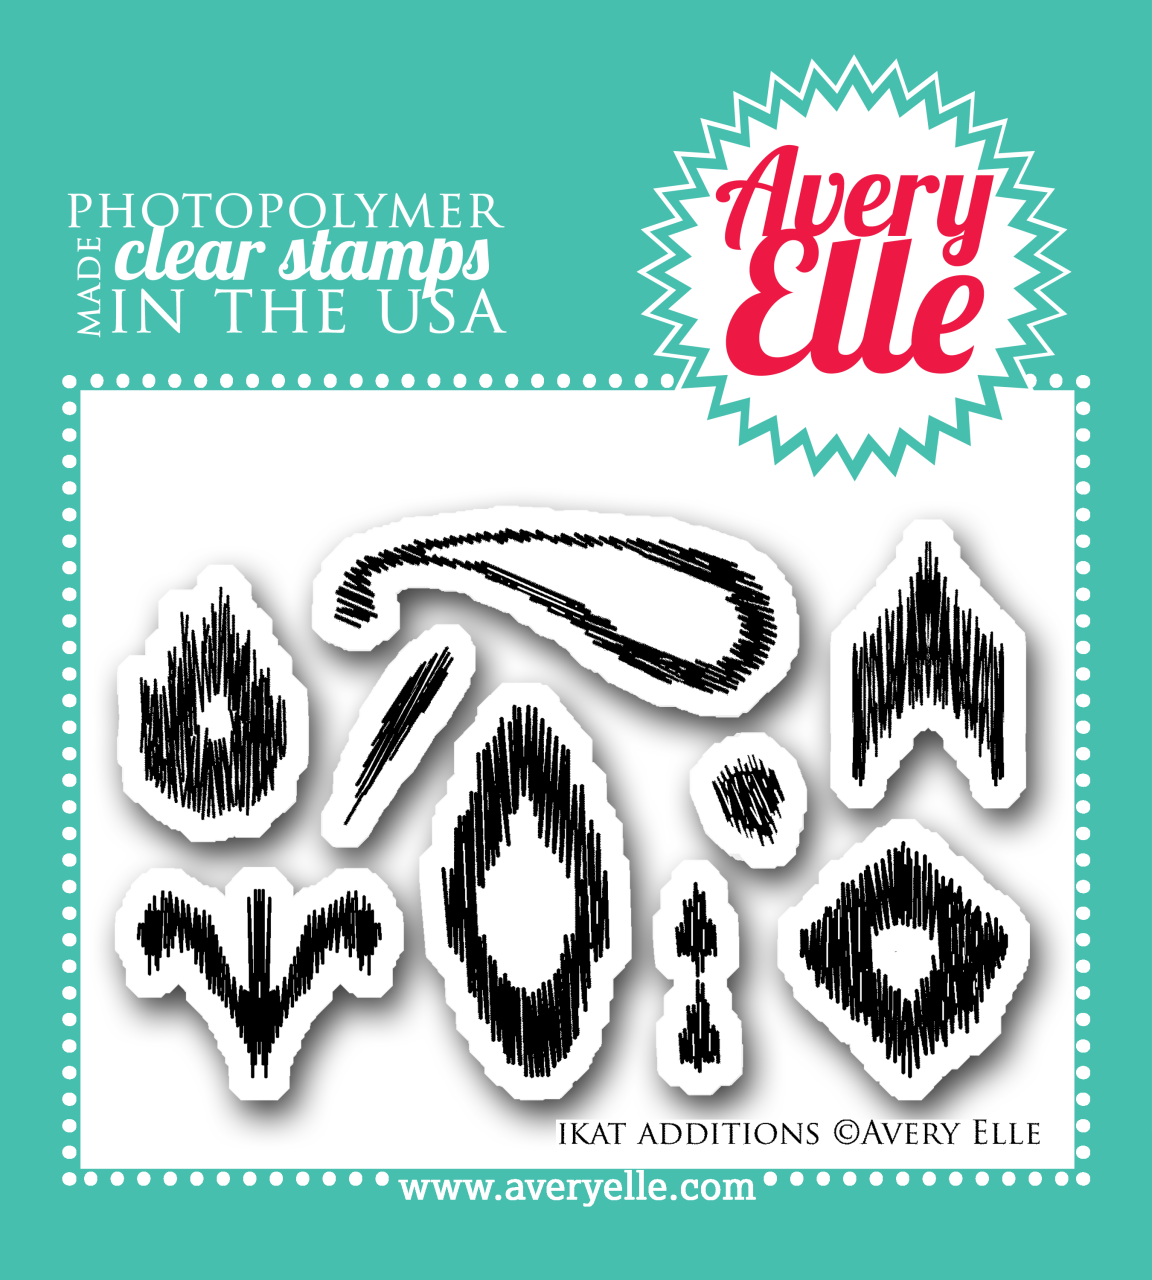 Our 2" x 3" Ikat Additions clear photopolymer stamp set may be mini in size, but it packs a lot of punch.  This set allows stampers to create even more Ikat patterns when used alone or with the coordinating Ikat clear photopolymer stamp set.